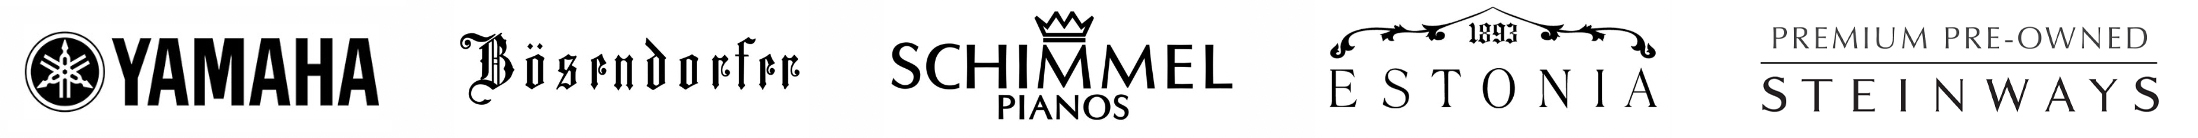 Classic Pianos proudly carries pianos from the world best piano makers, including Yamaha, Bosendorfer, Schimmel, Estonia, and Steinway